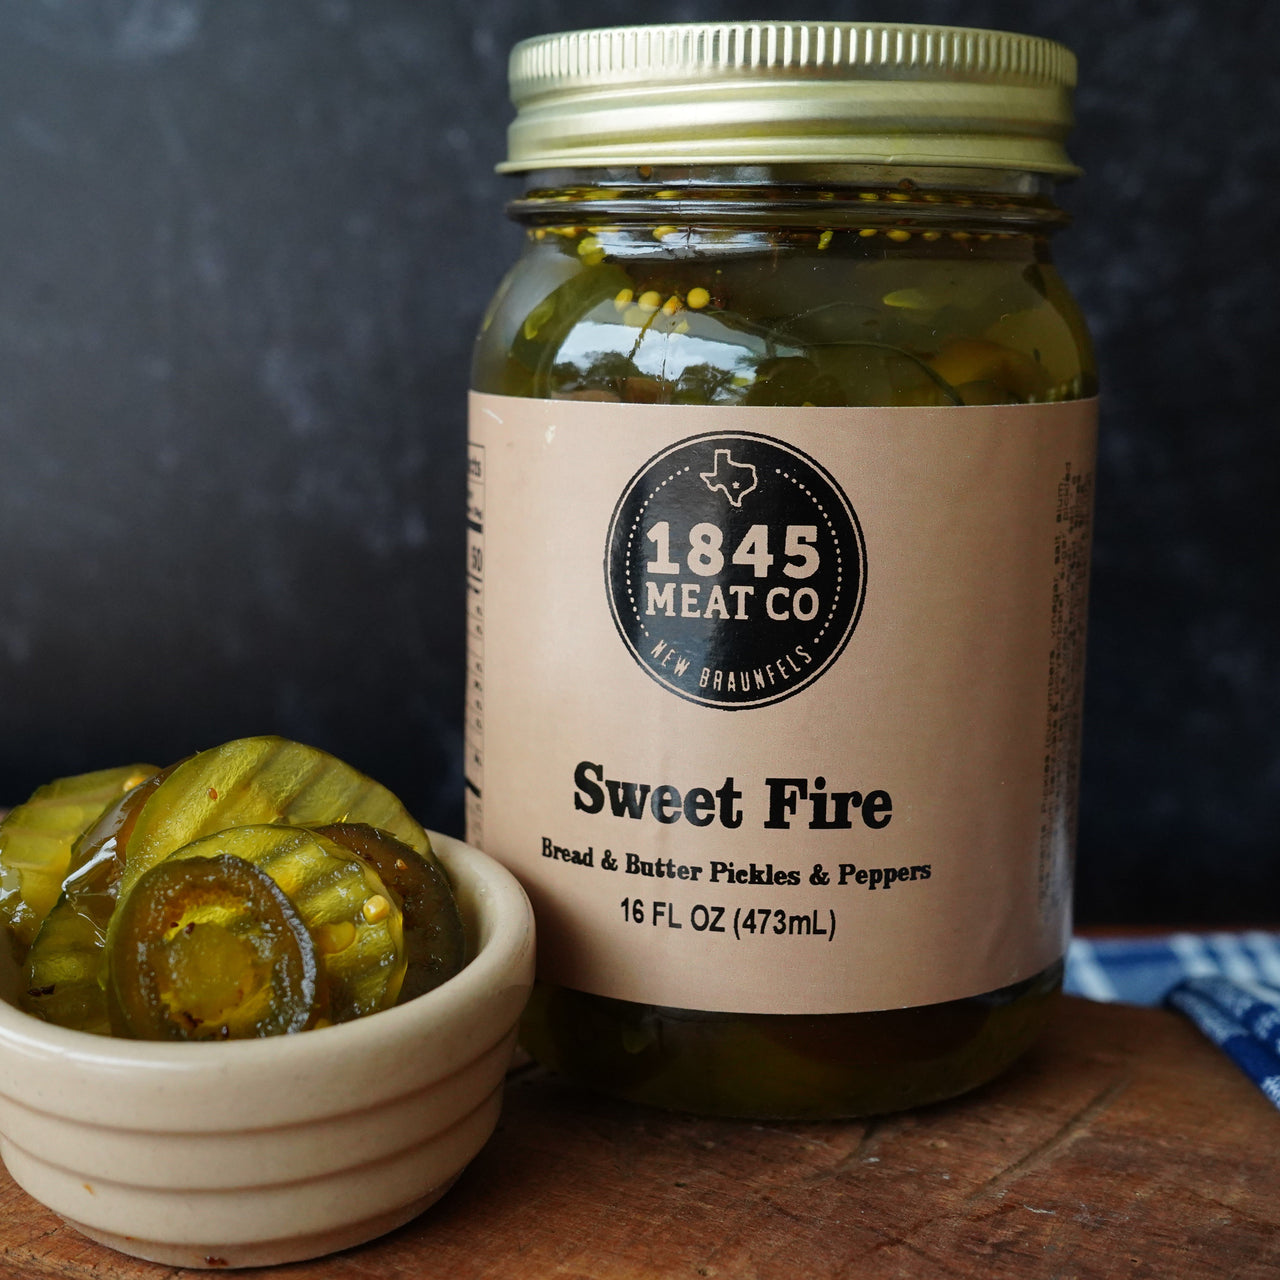 The perfect amount of jalapeno added to the bread and butter pickles. A great compliment to any sandwich. 	